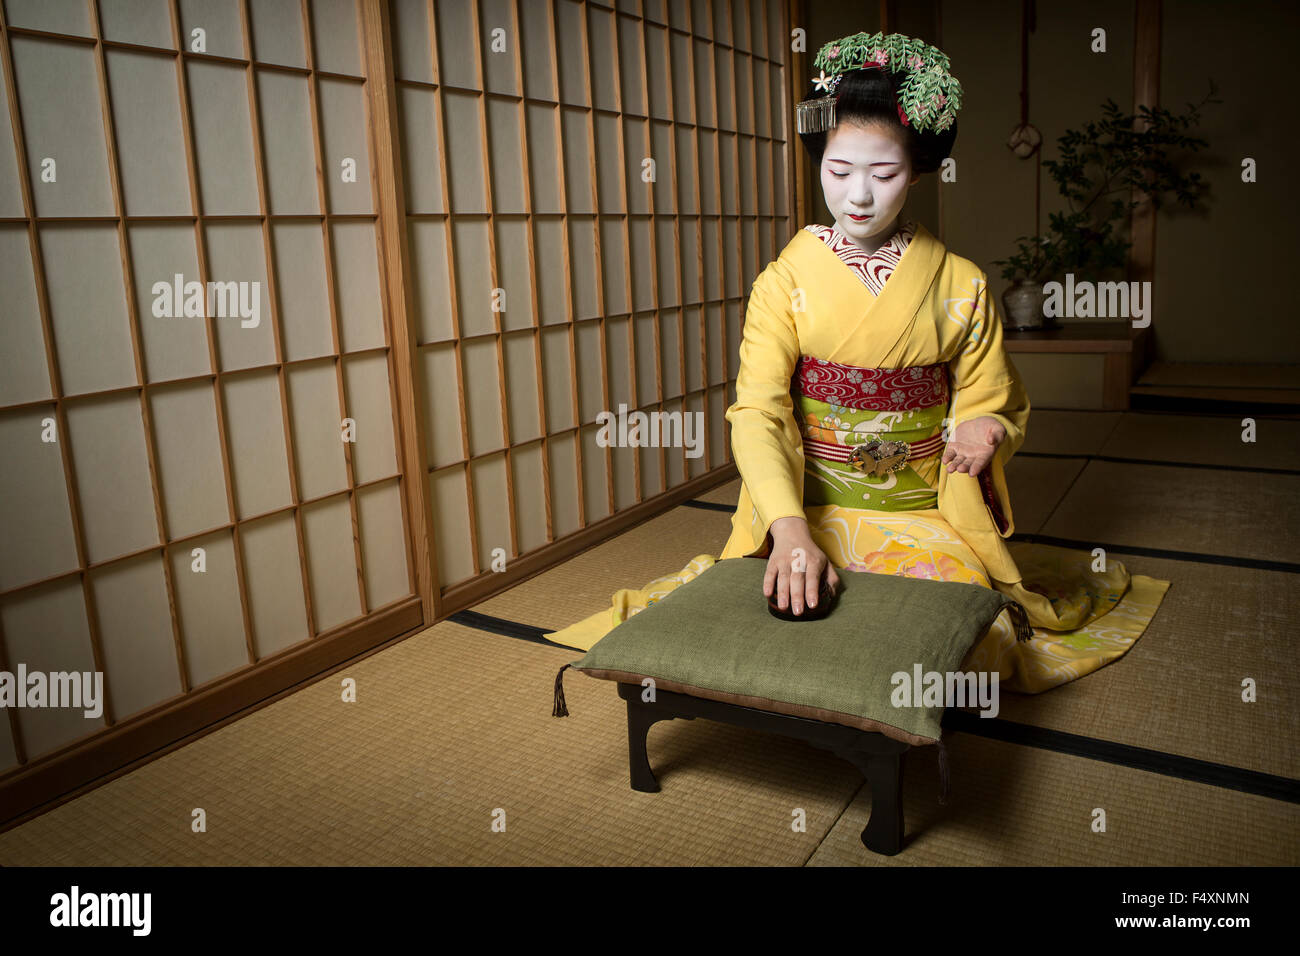 A Maiko  (apprentice geisha) displays some of the skills she has learnt during her apprenticeship. Stock Photo